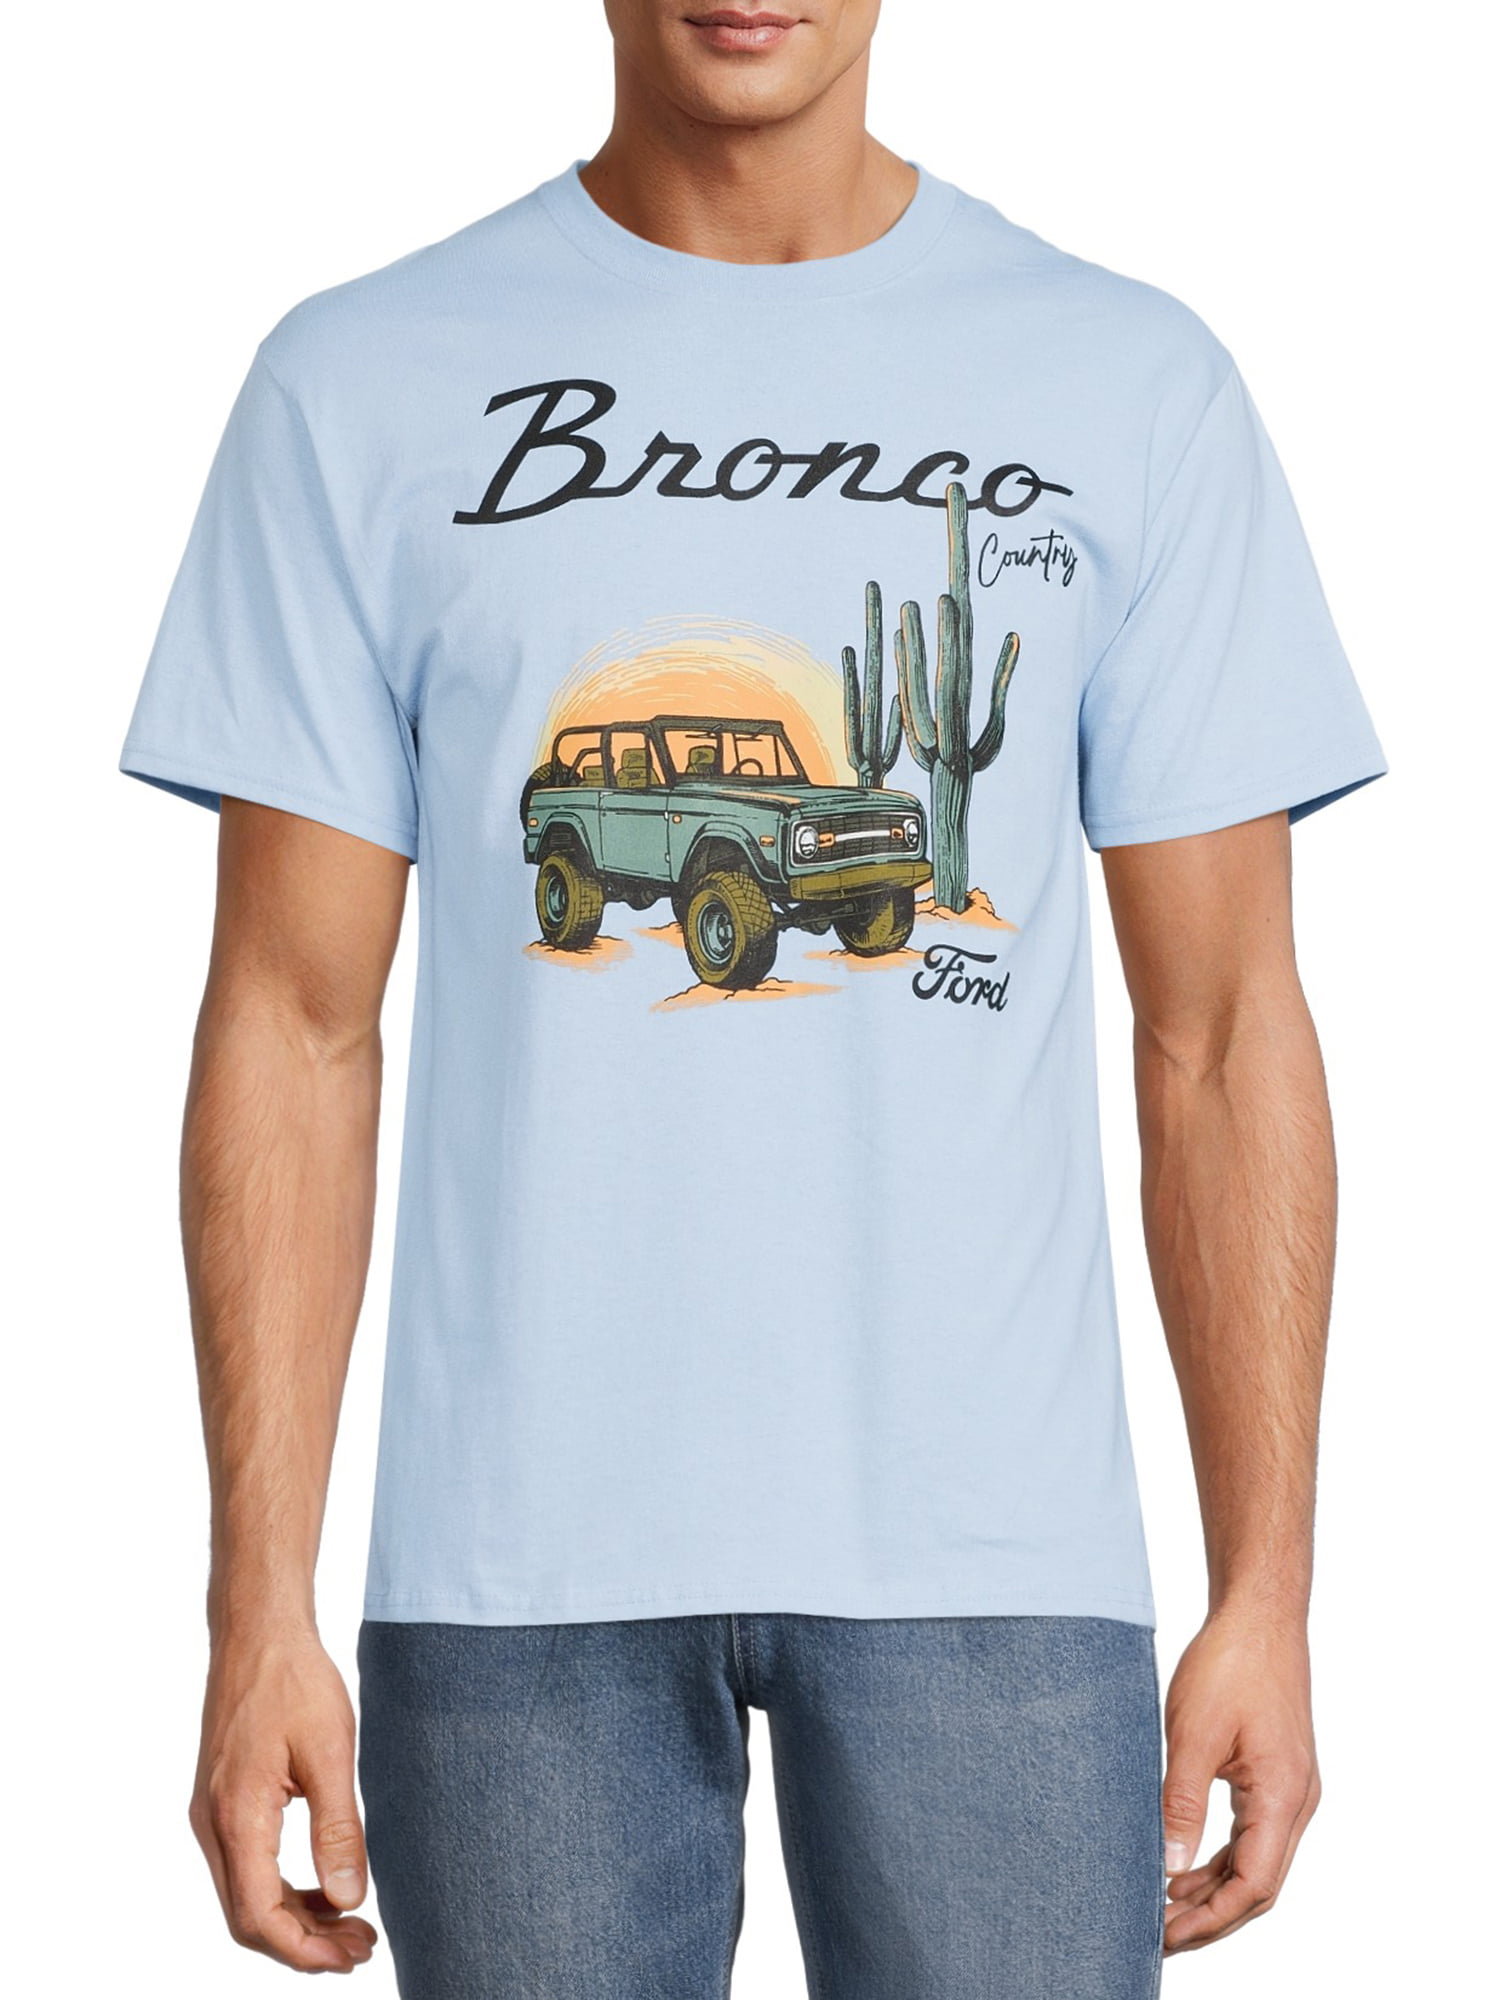 bronco shirts are coming